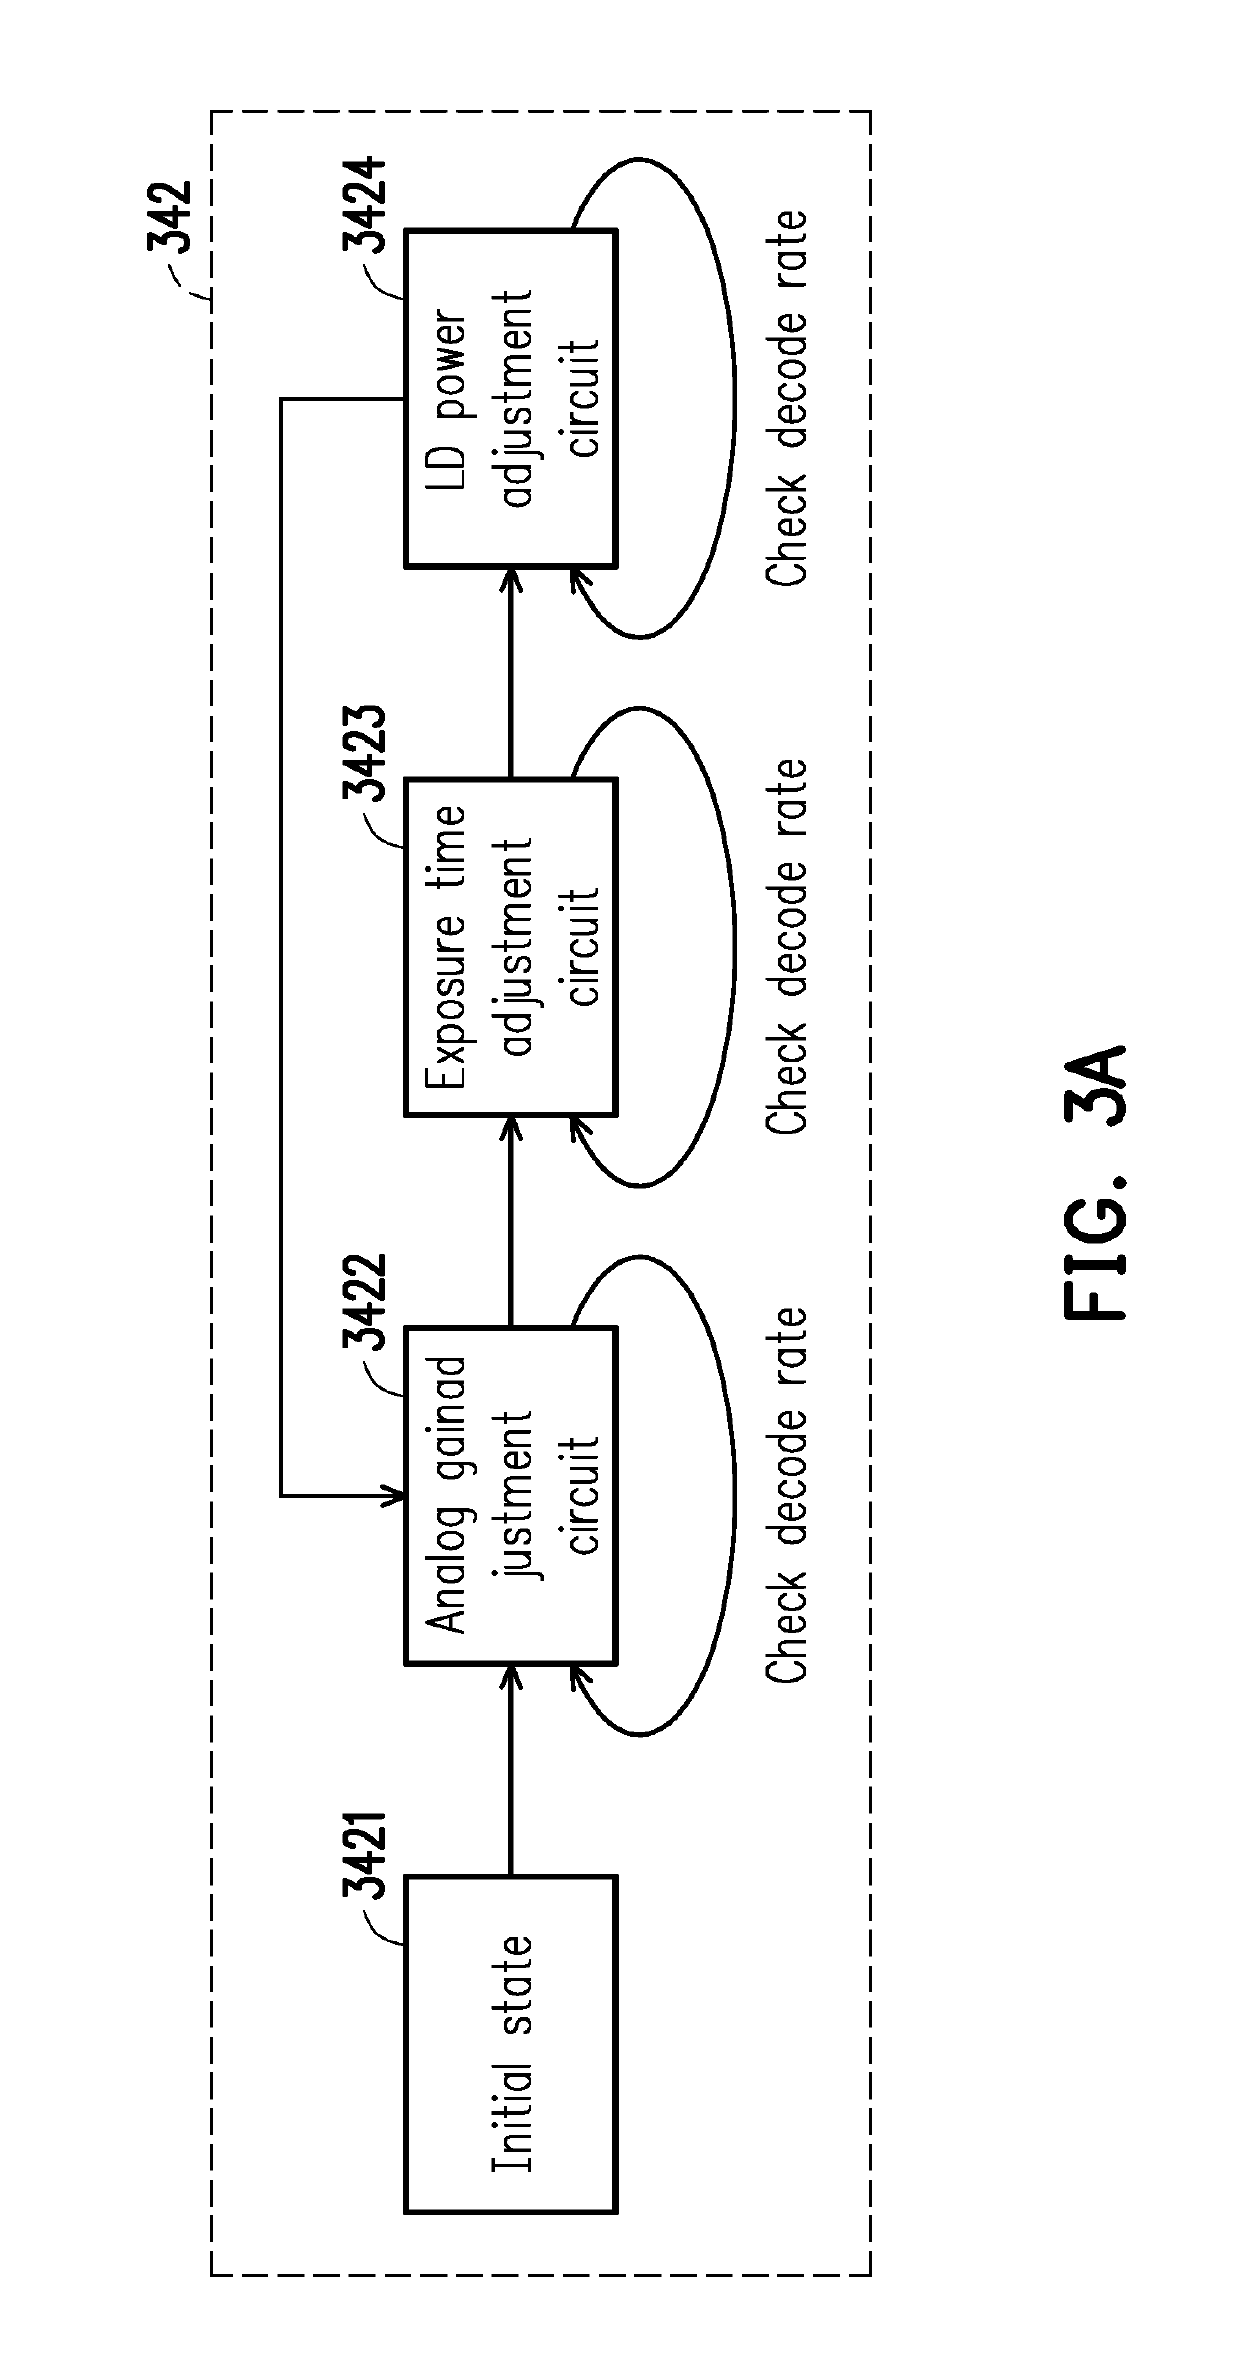 Auto-exposure controller, auto-exposure control method and system based on structured light